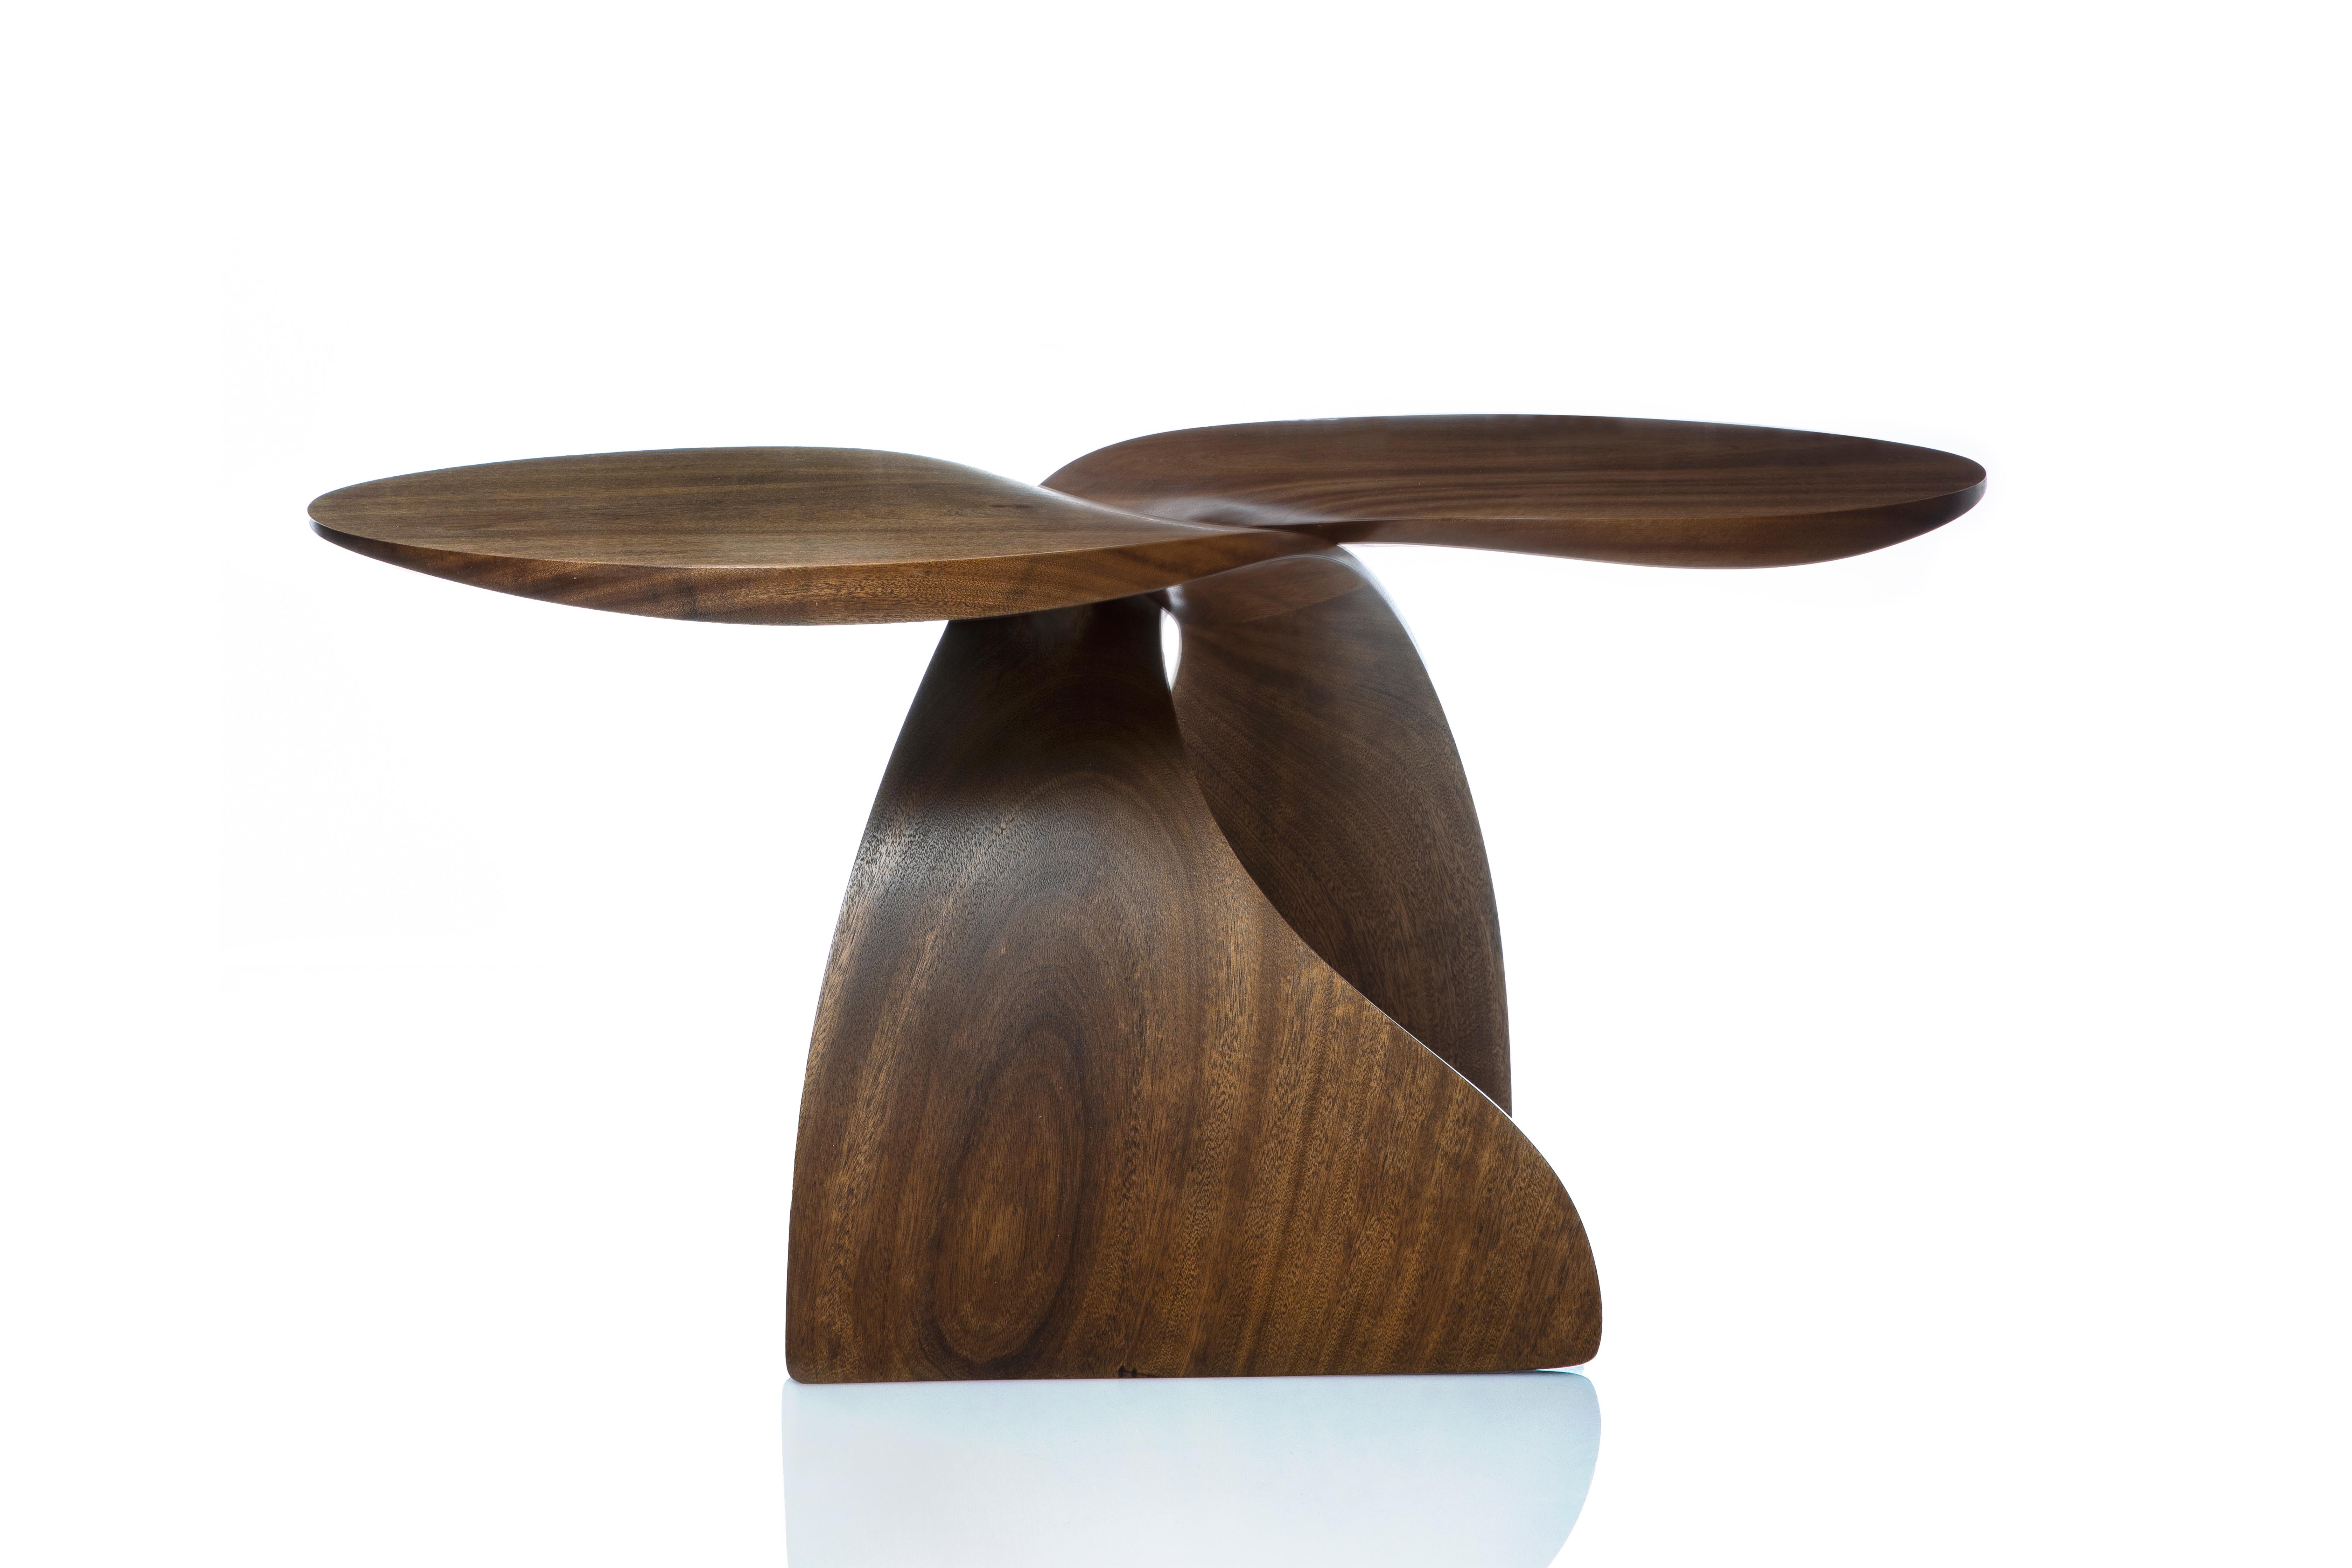 This contemporary table combines the clearly organic shape of the hand carved sweeping base elements, with the contemporary, geometric shape of the tops. Made up of two of identical sapele wood carvings, it has a playful rhythm like a pair of fish,